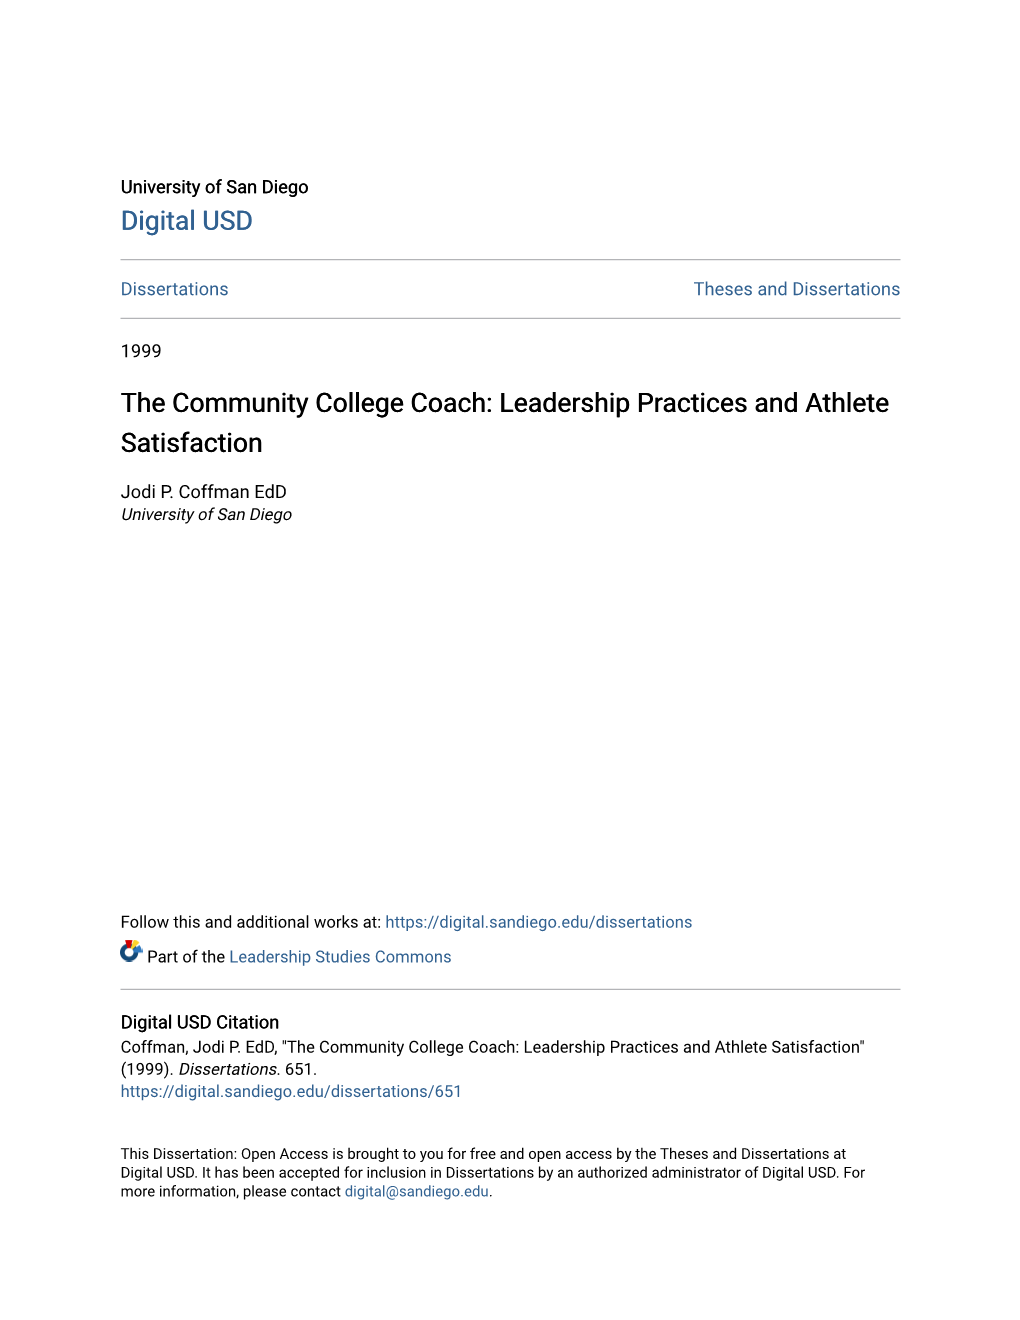 The Community College Coach: Leadership Practices and Athlete Satisfaction